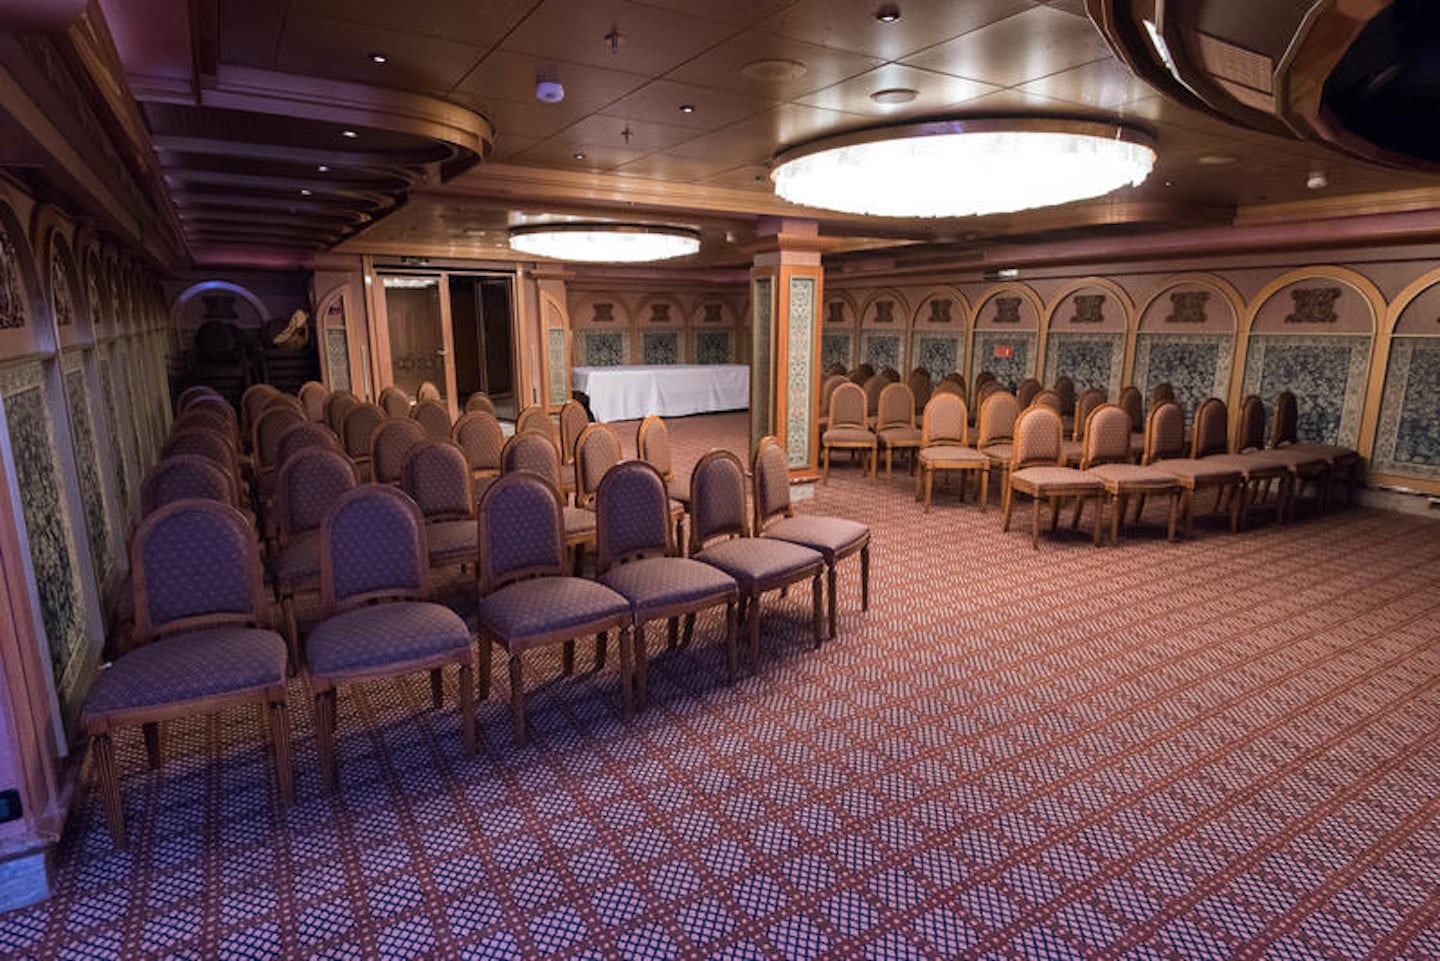 Tapestry Conference Room on Carnival Liberty